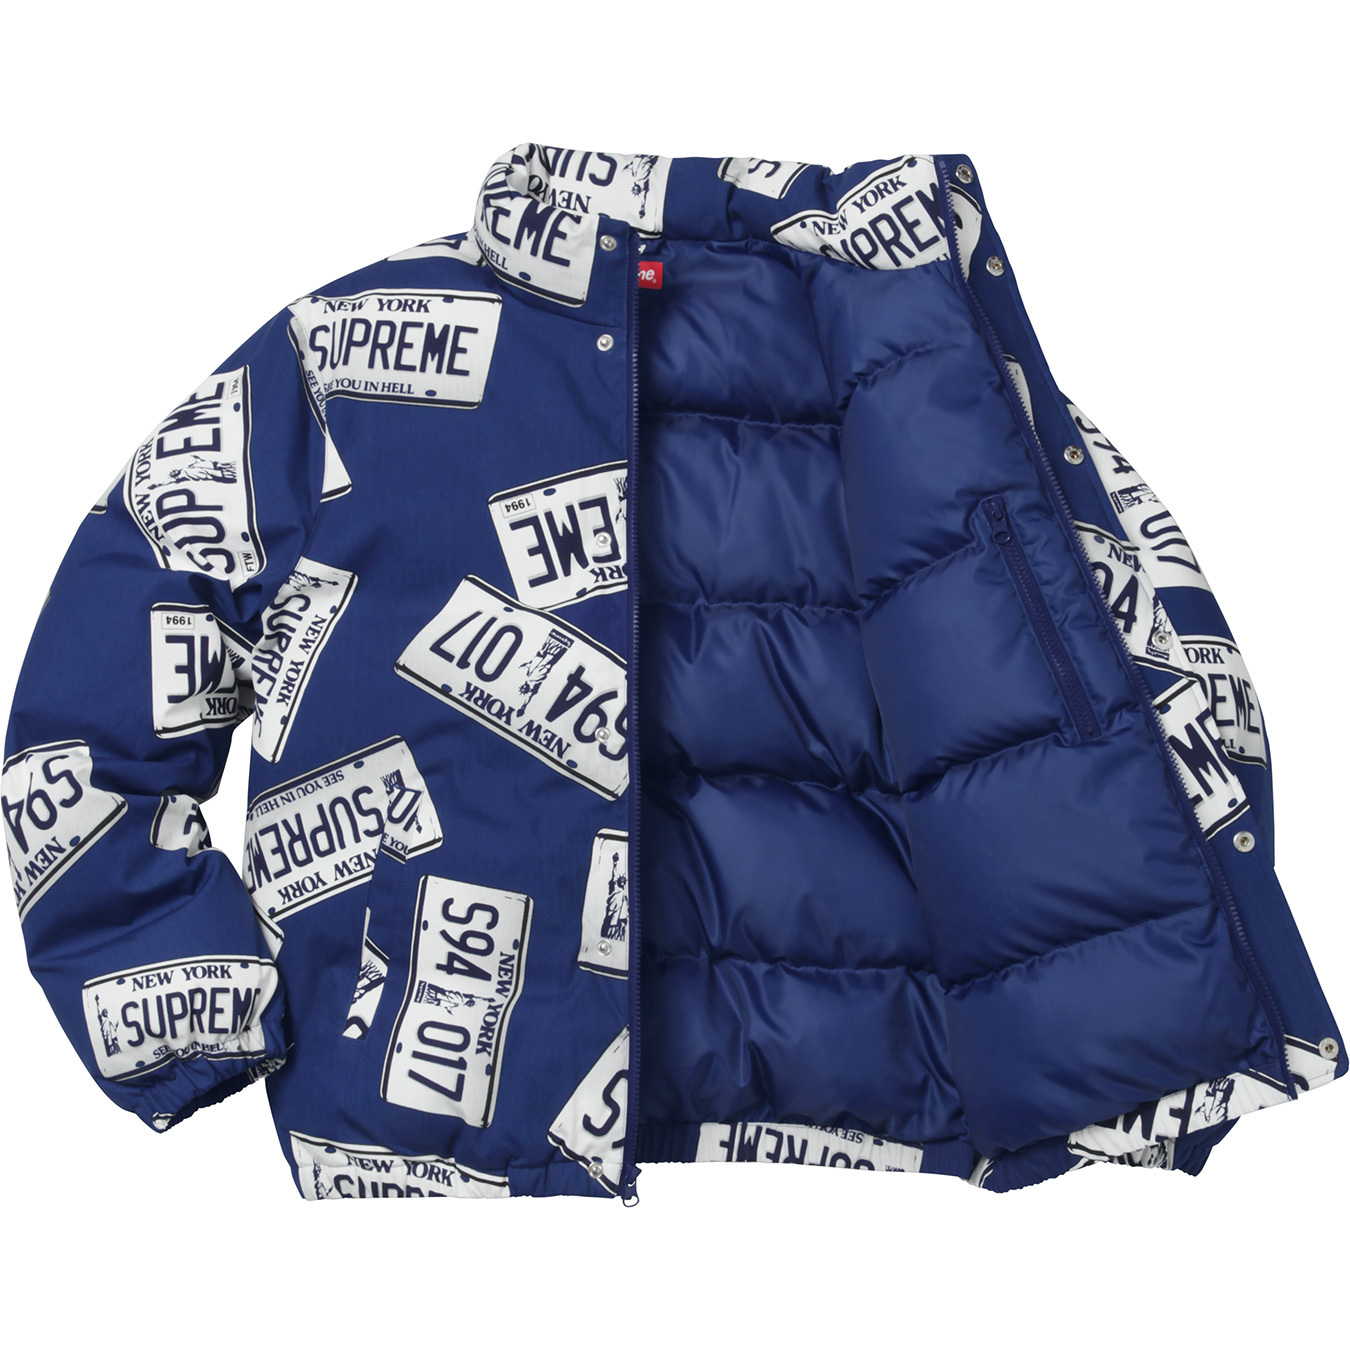 Supreme License Plate Puffy Jacket Navy メンズ - FW17 - JP